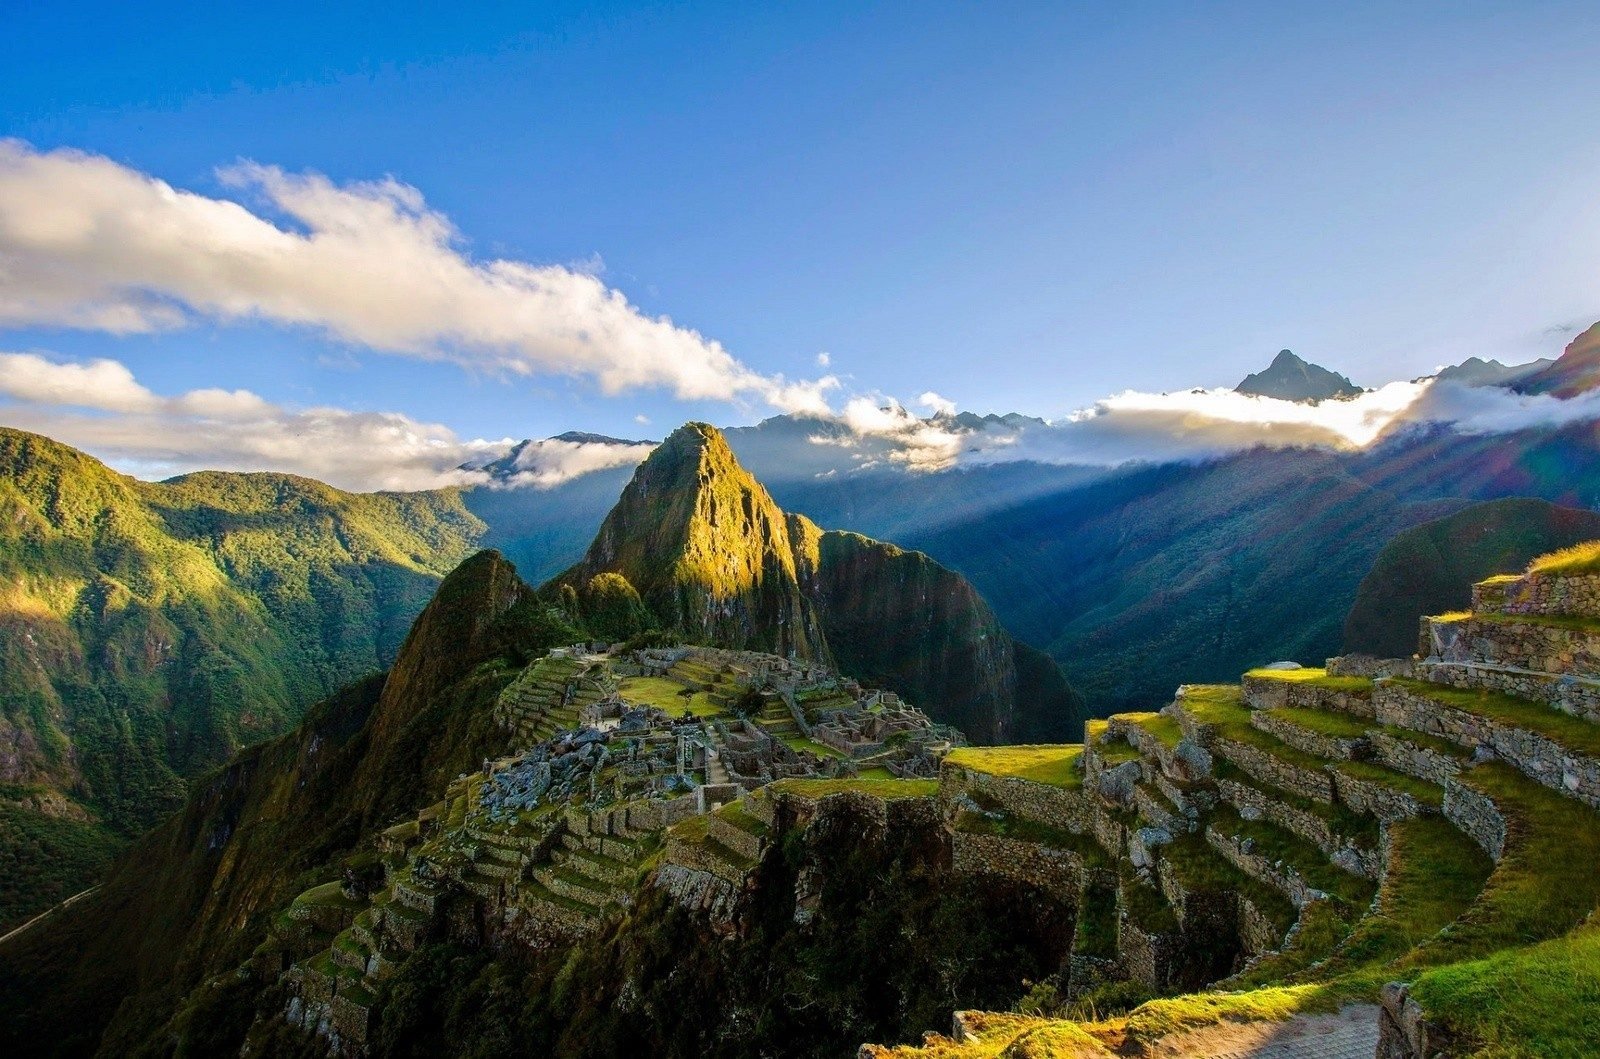 Machu Picchu, surrounded by green mountains.